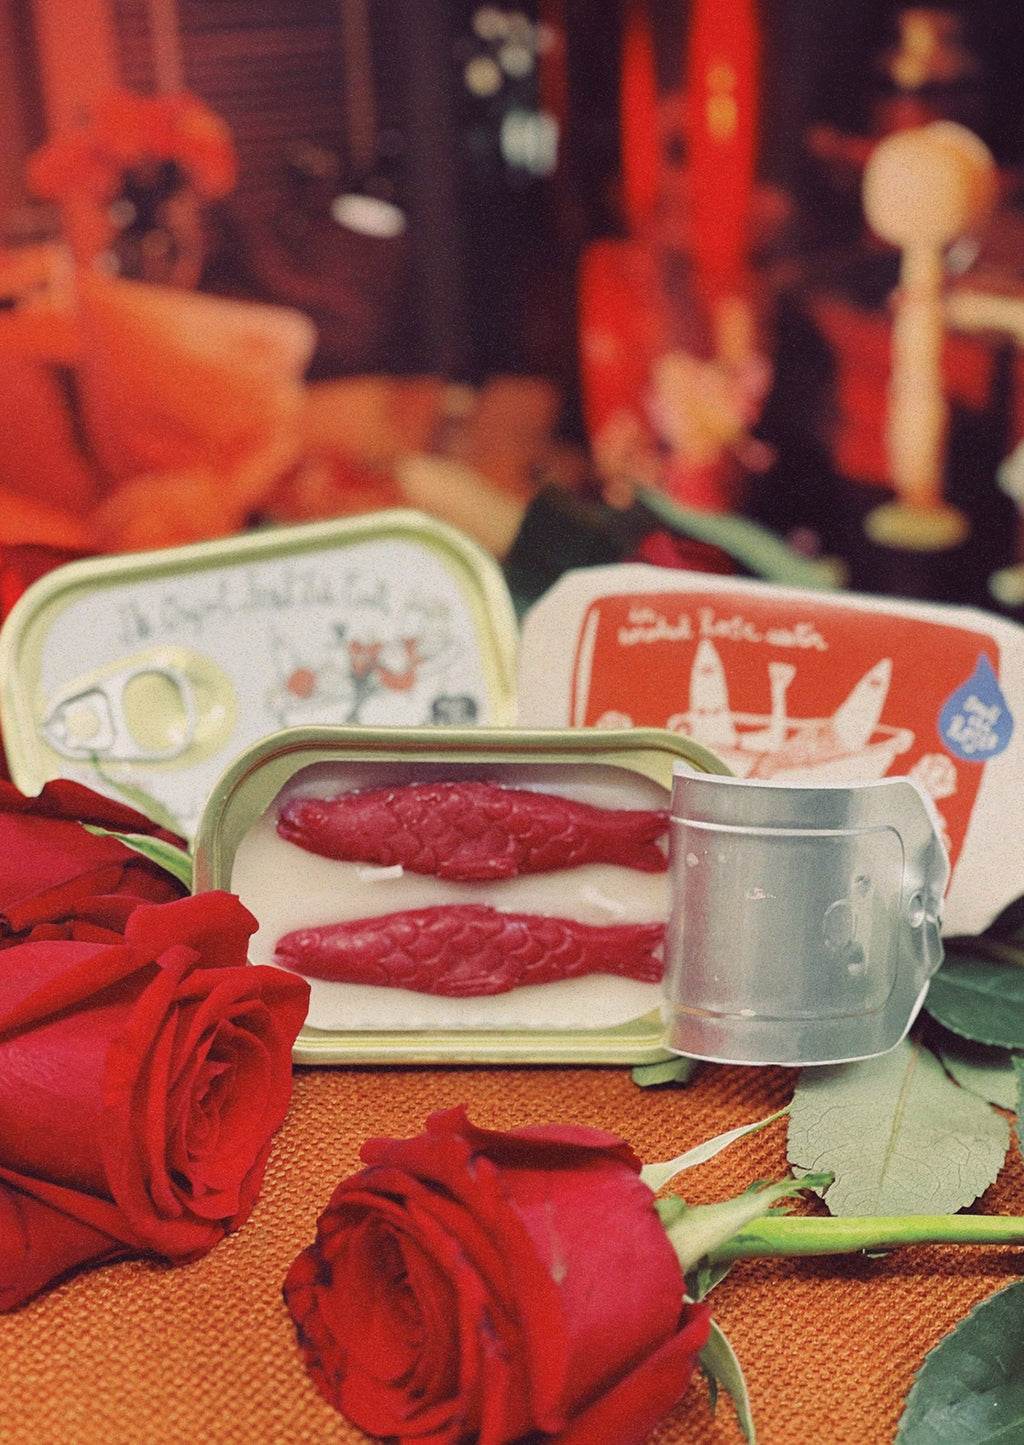 Smoked Rose Water: A tinned fish candle with red fish in rose water scent.